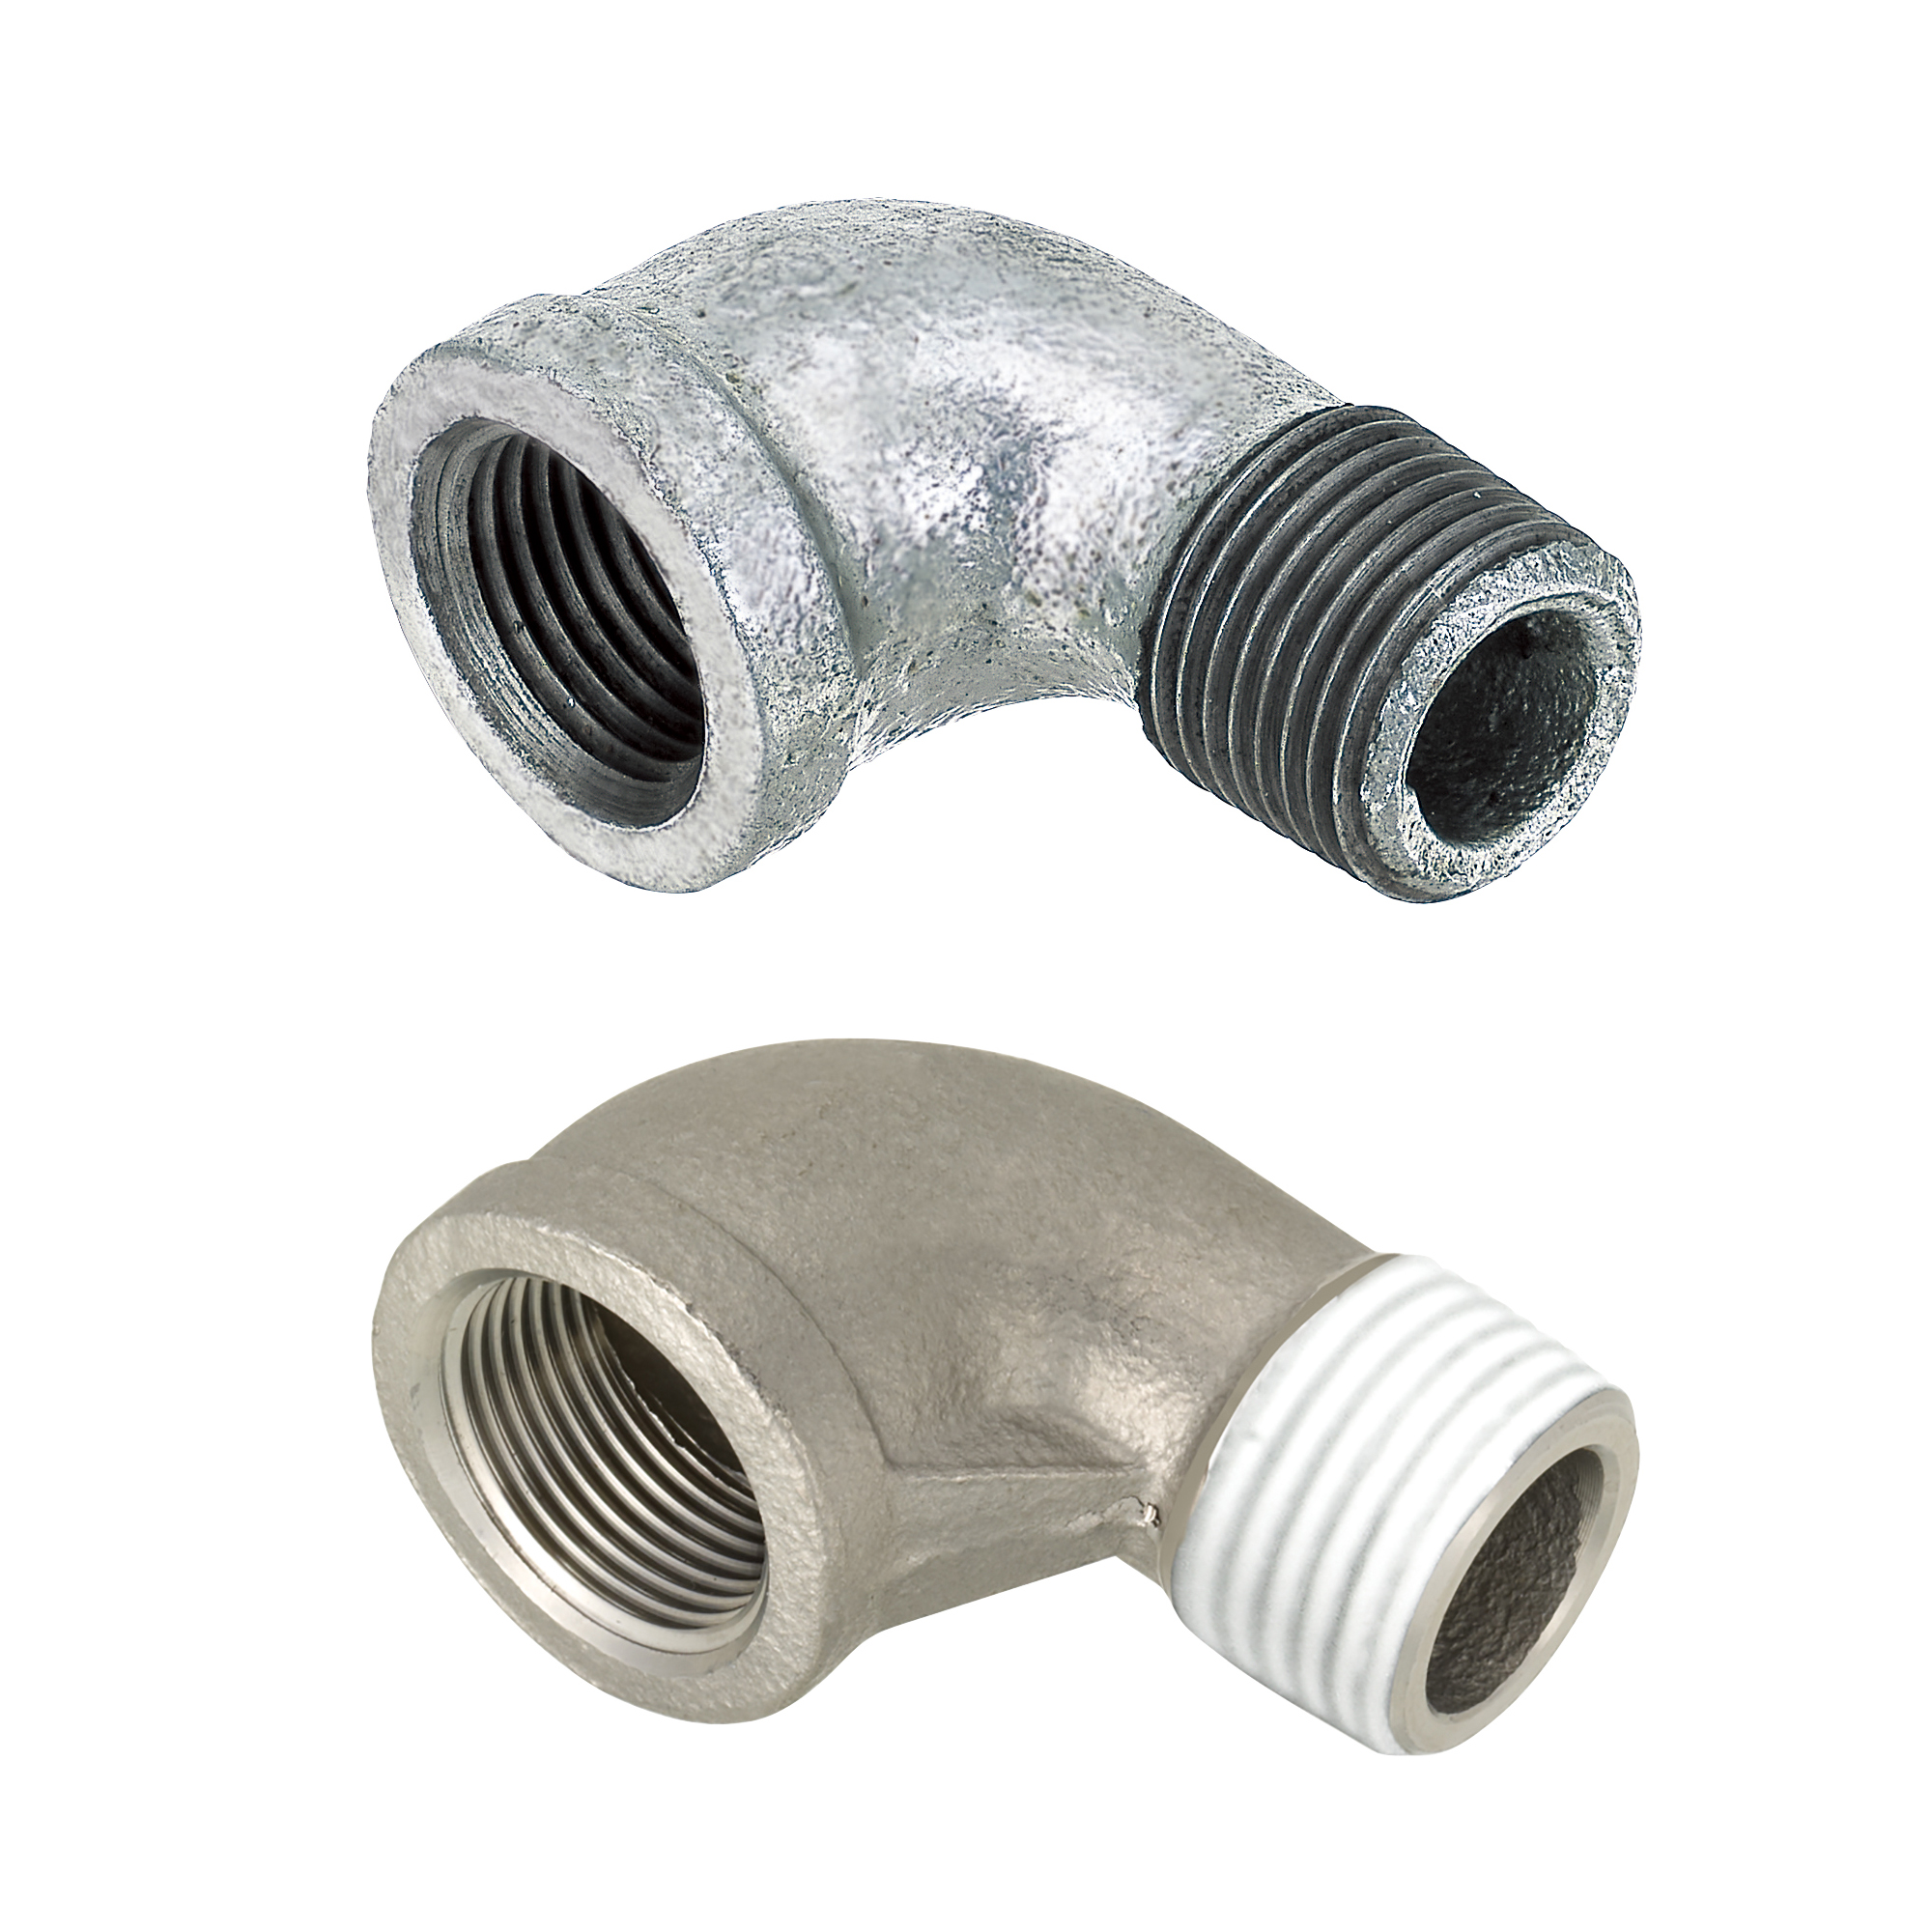 Low Pressure Fittings/90 Deg. Elbow/Threaded and Tapped SGPPEL32A